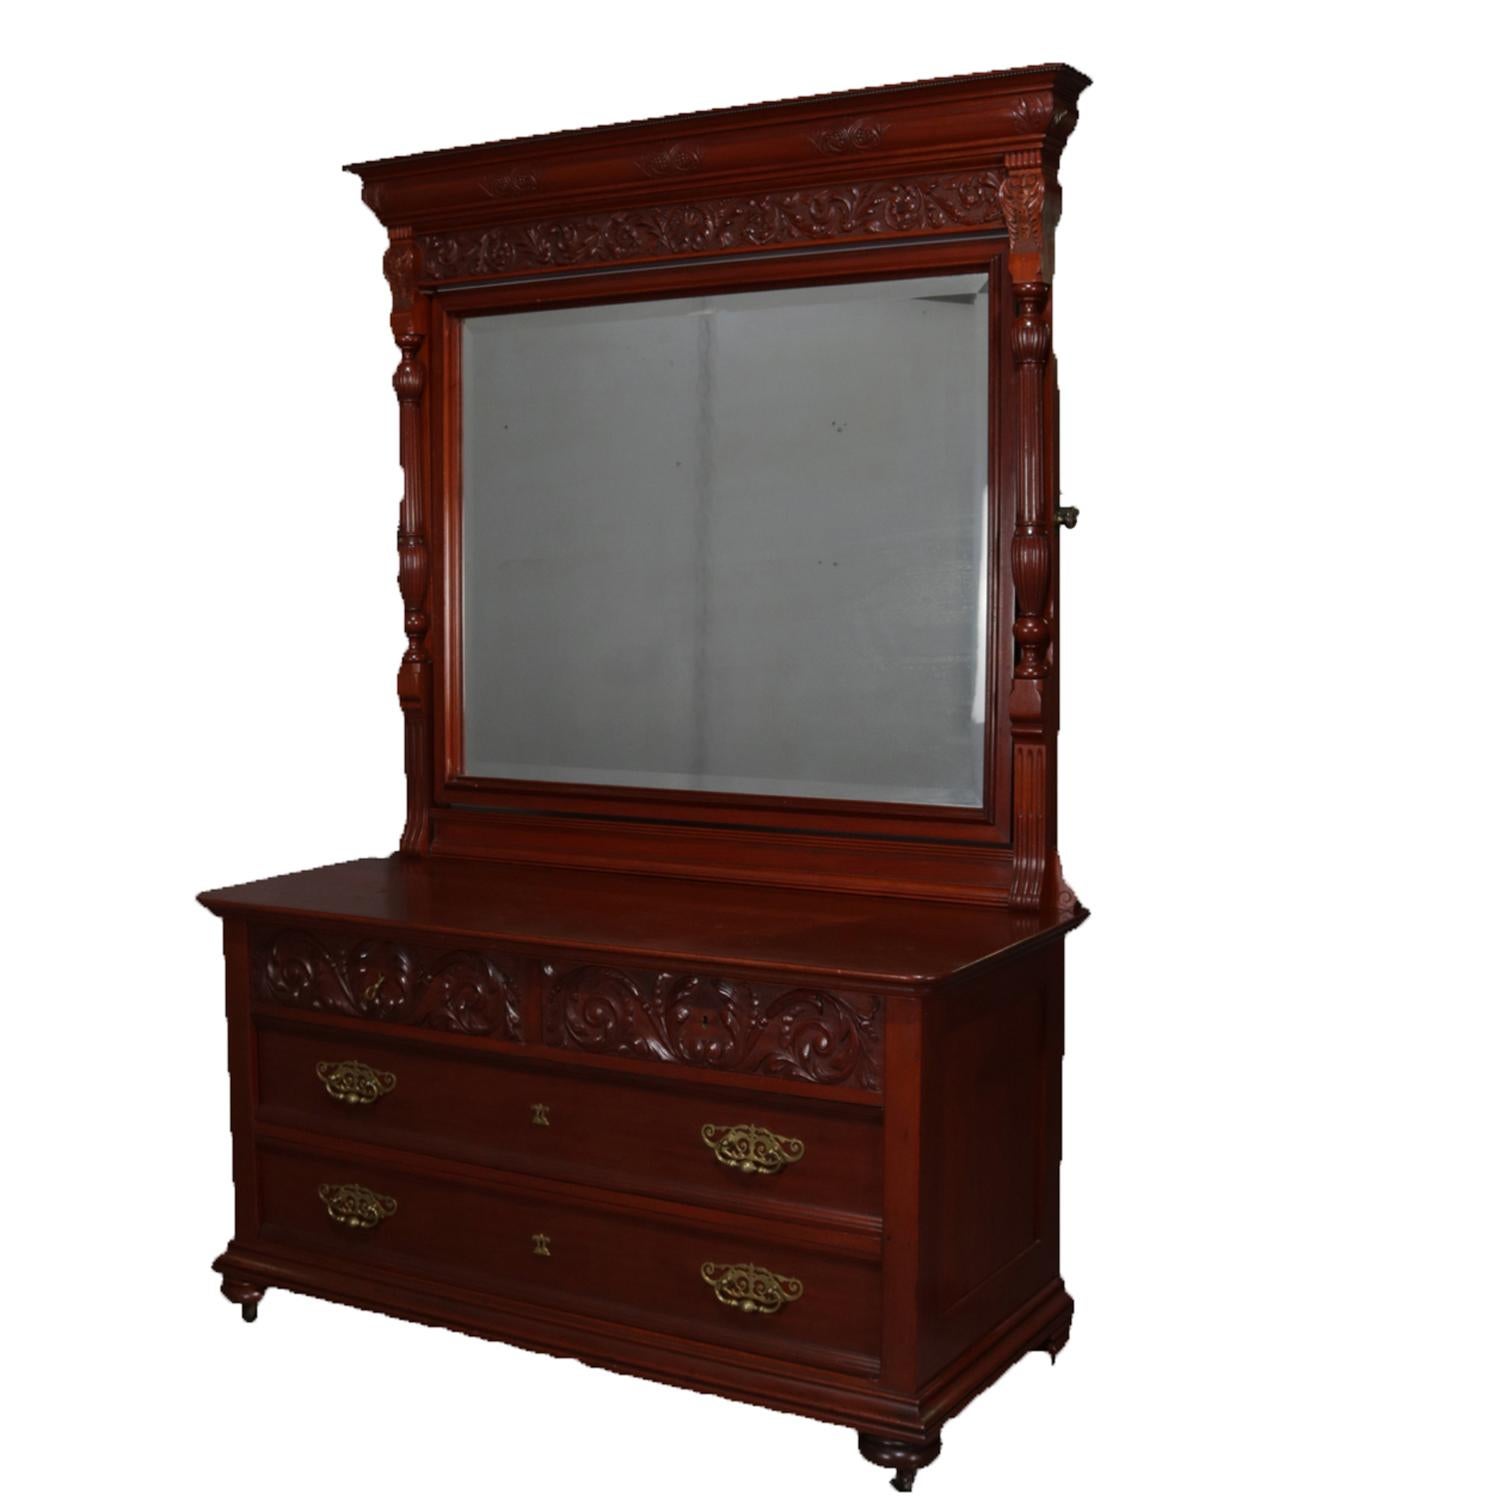 Antique Victorian Horner school mahogany chest of drawers features carved foliate, scroll and acanthus decoration and beveled mirror, circa 1900.
 
   
Measures: 81